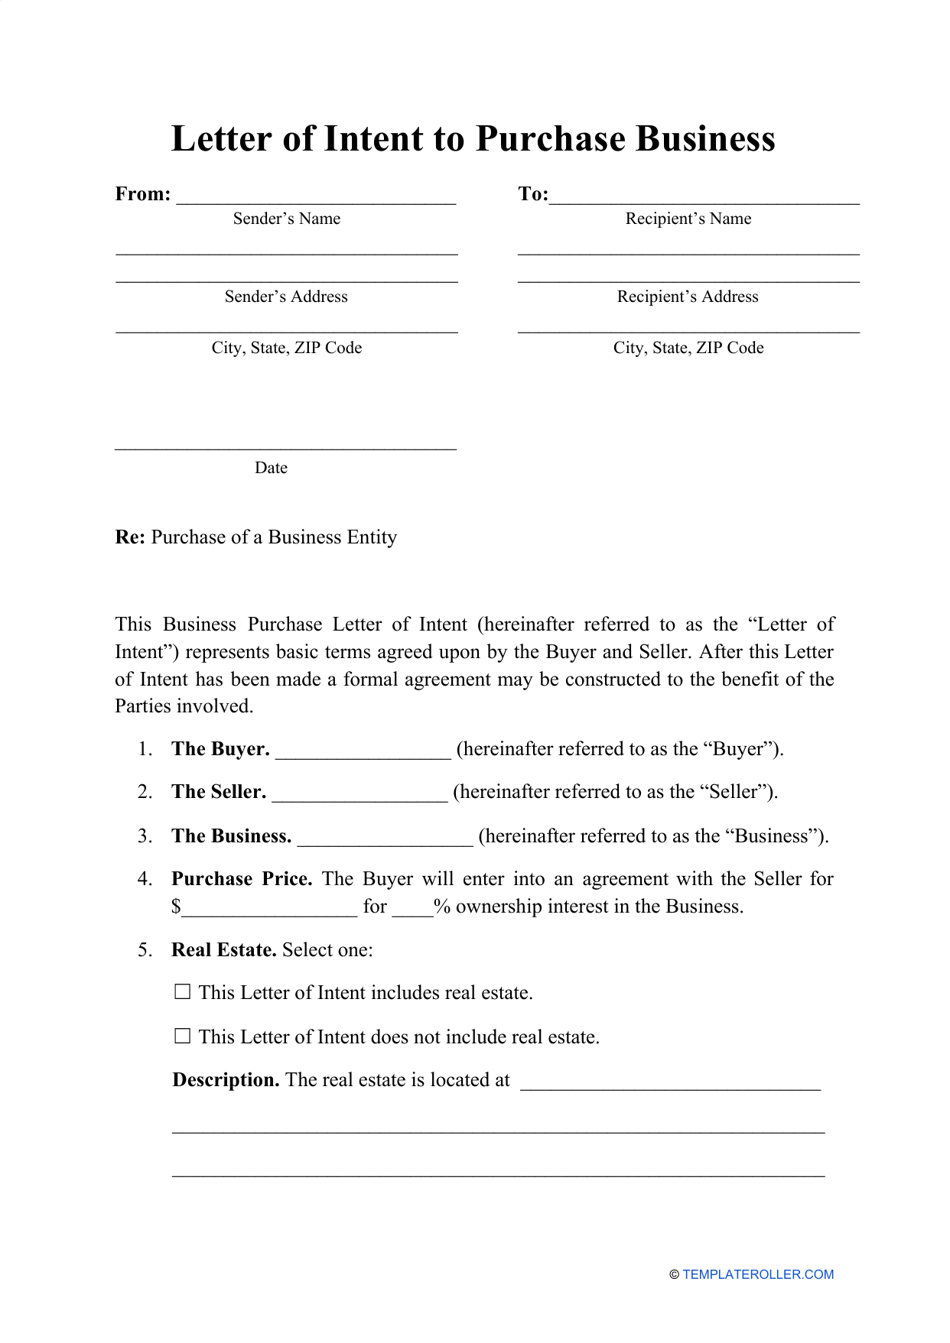 Letter of Intent to Purchase Business Template Download Printable With Regard To Letter Of Intent For Real Estate Purchase Template